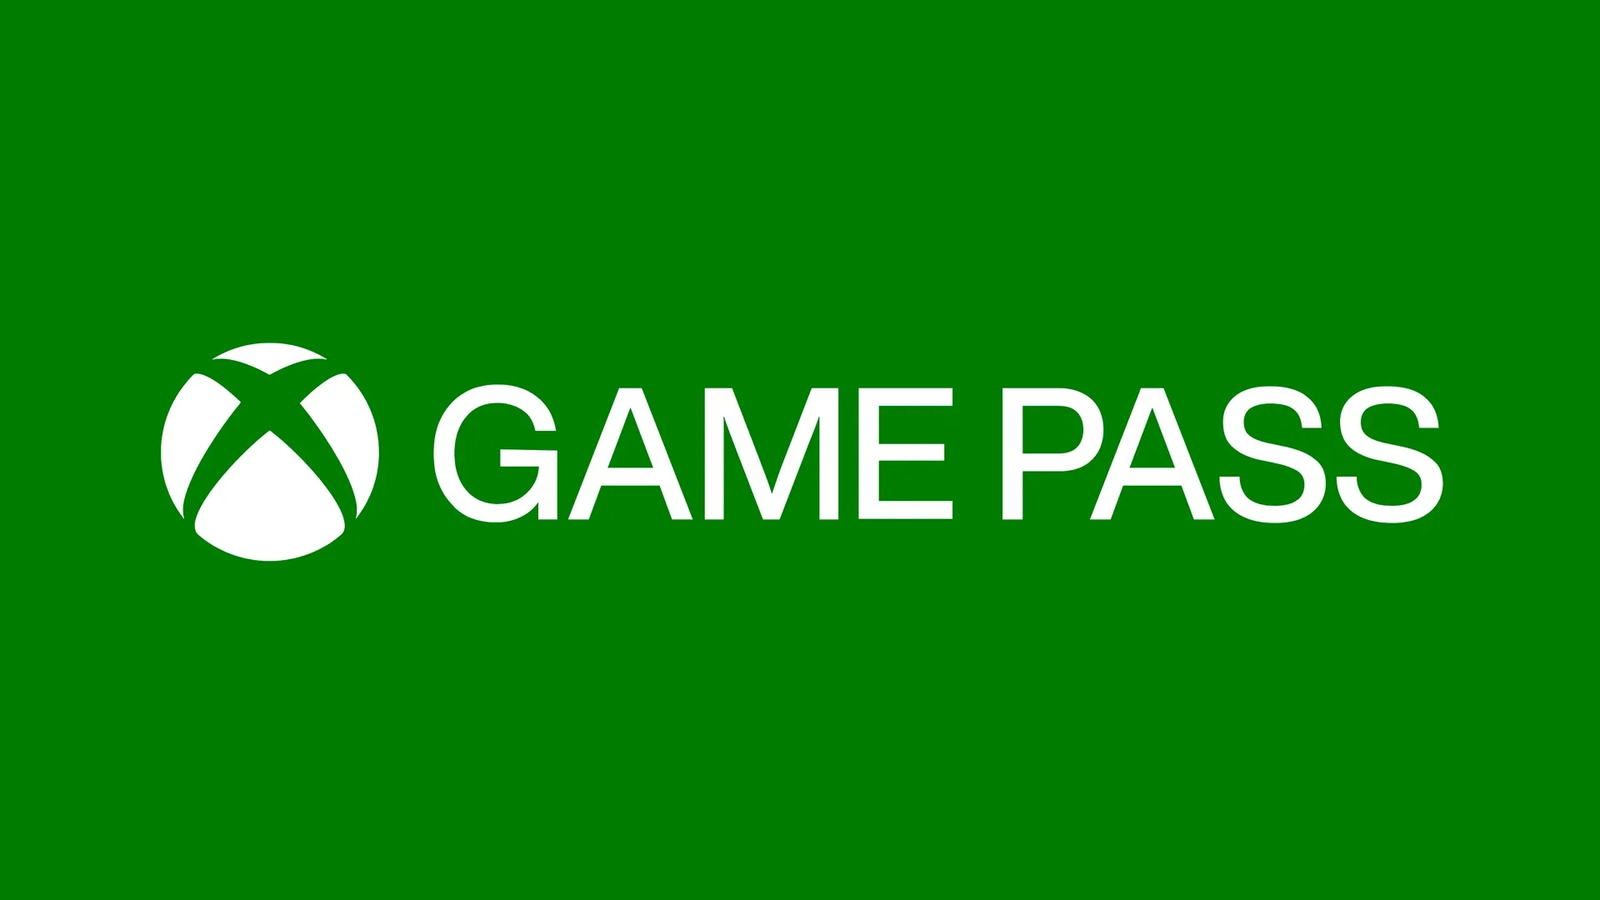 Score yourself an Xbox Game Pass Ultimate trial membership for the price of  a piece of candy